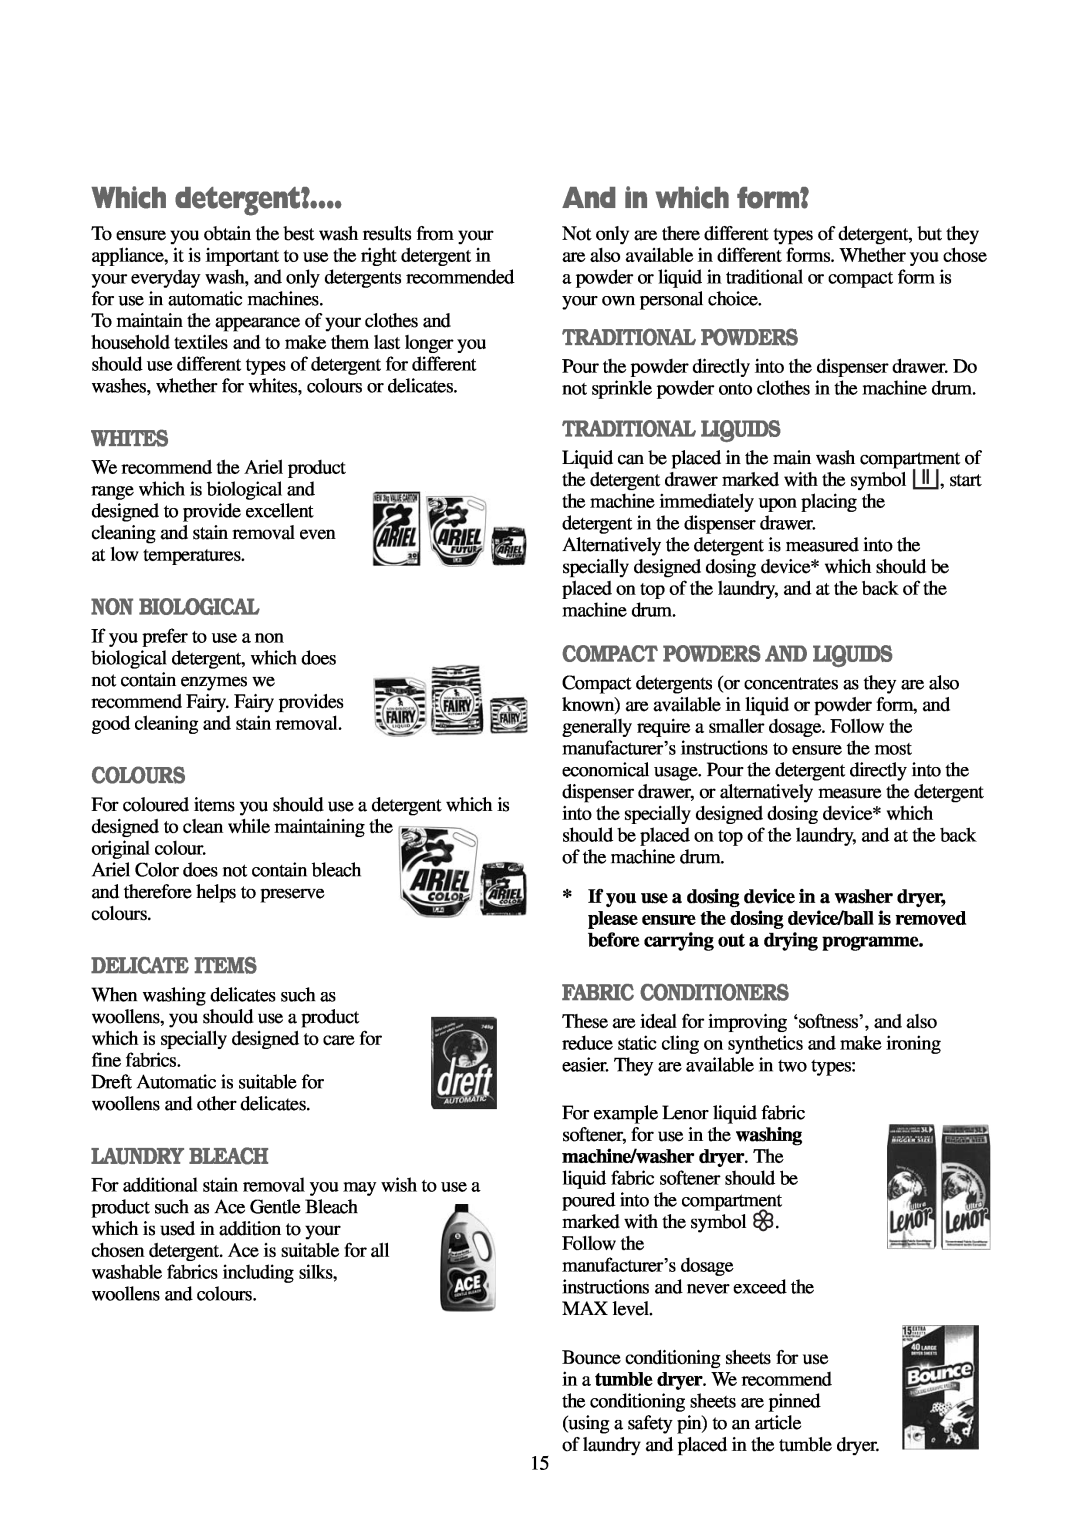 Electrolux EWD 1419 I manual Which detergent?, And in which form?, Whites, Non Biological, Colours, Delicate Items 